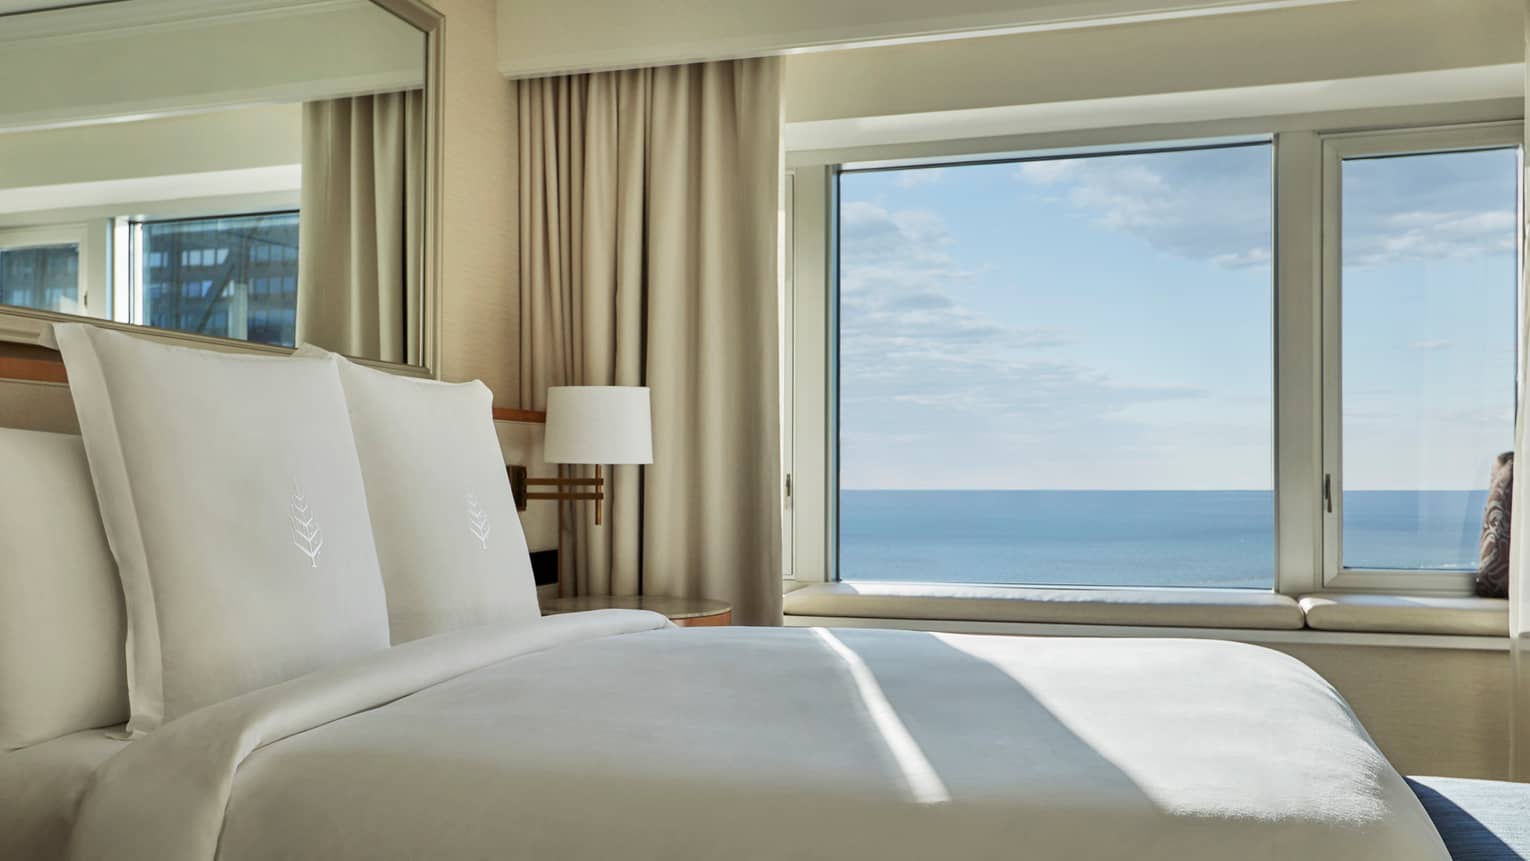 Close-up of hotel bed with white linens, Four Seasons logo by sunny window overlooking Lake Michigan